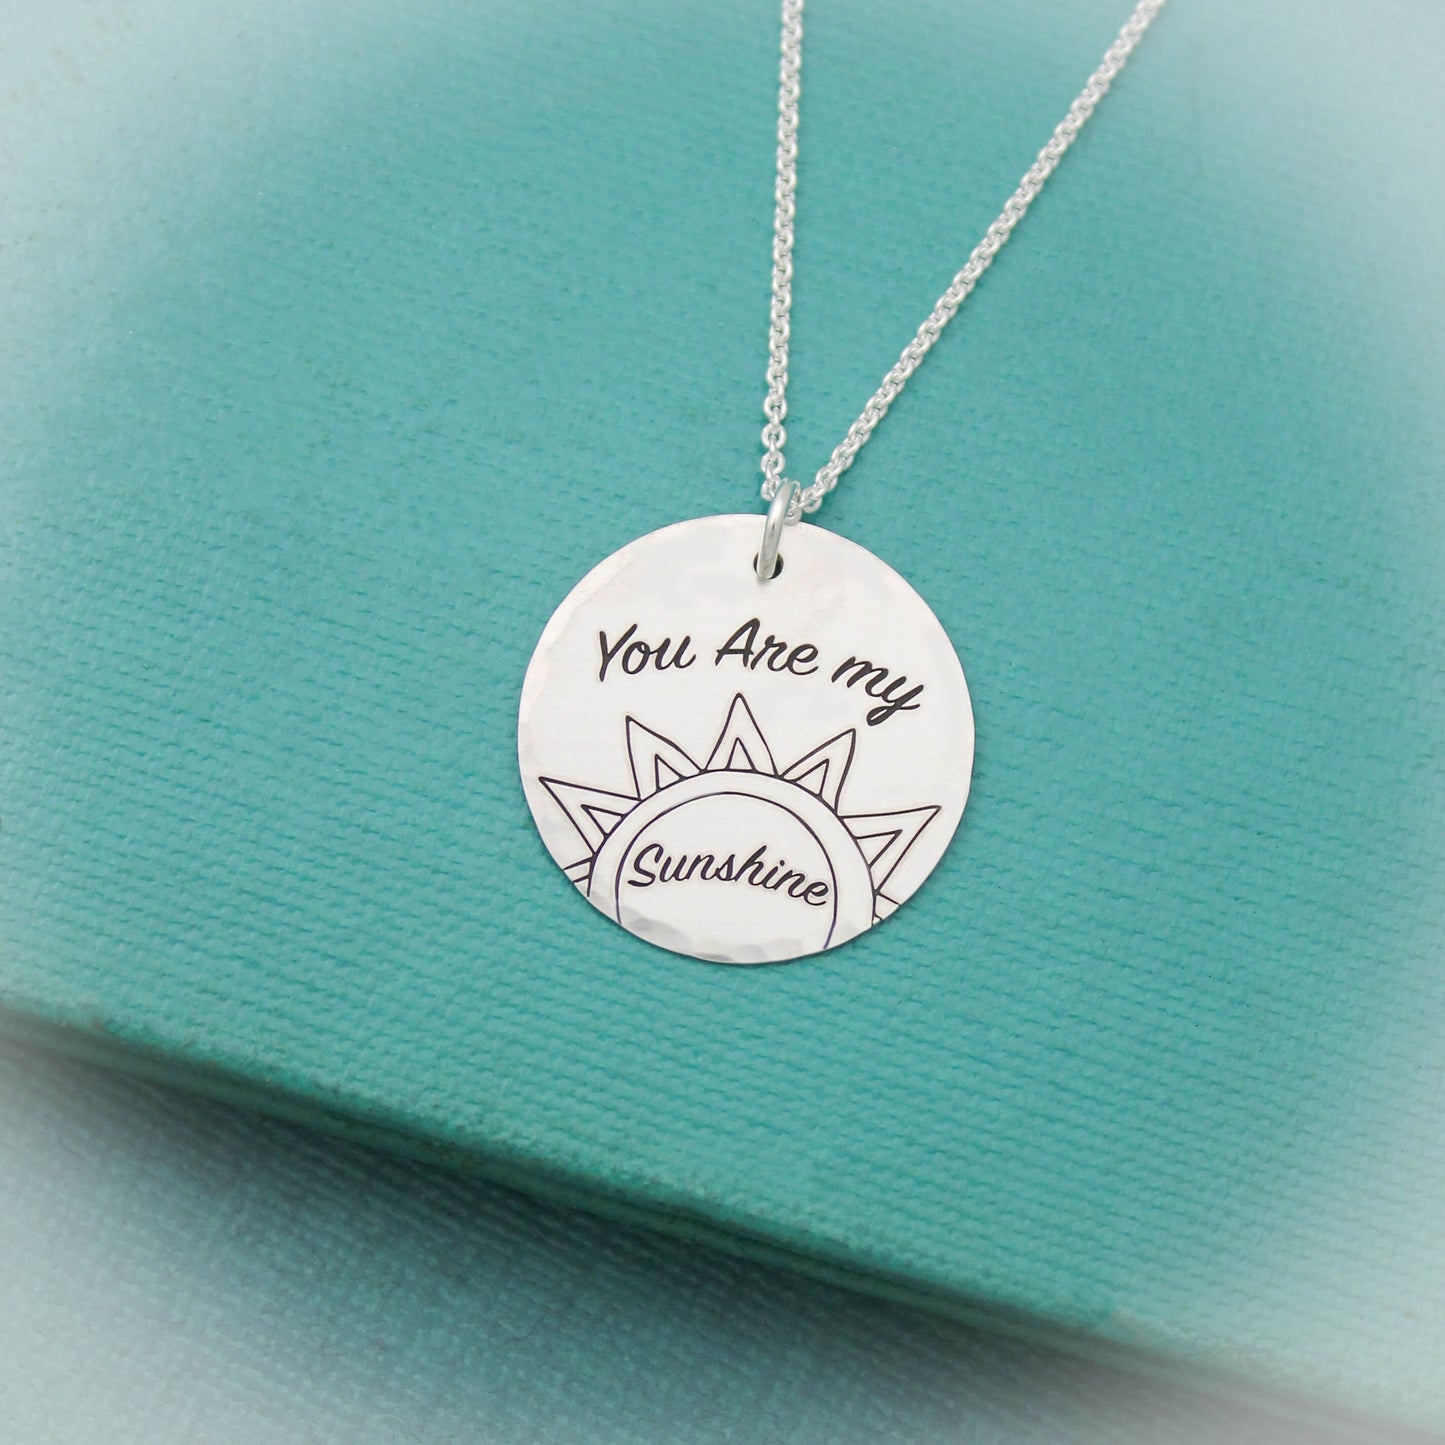 You Are My Sunshine Necklace, Sun Jewelry, Sunshine Necklace, Mother Necklace, Grandmother Necklace, Gifts for Her, Personalized Jewelry